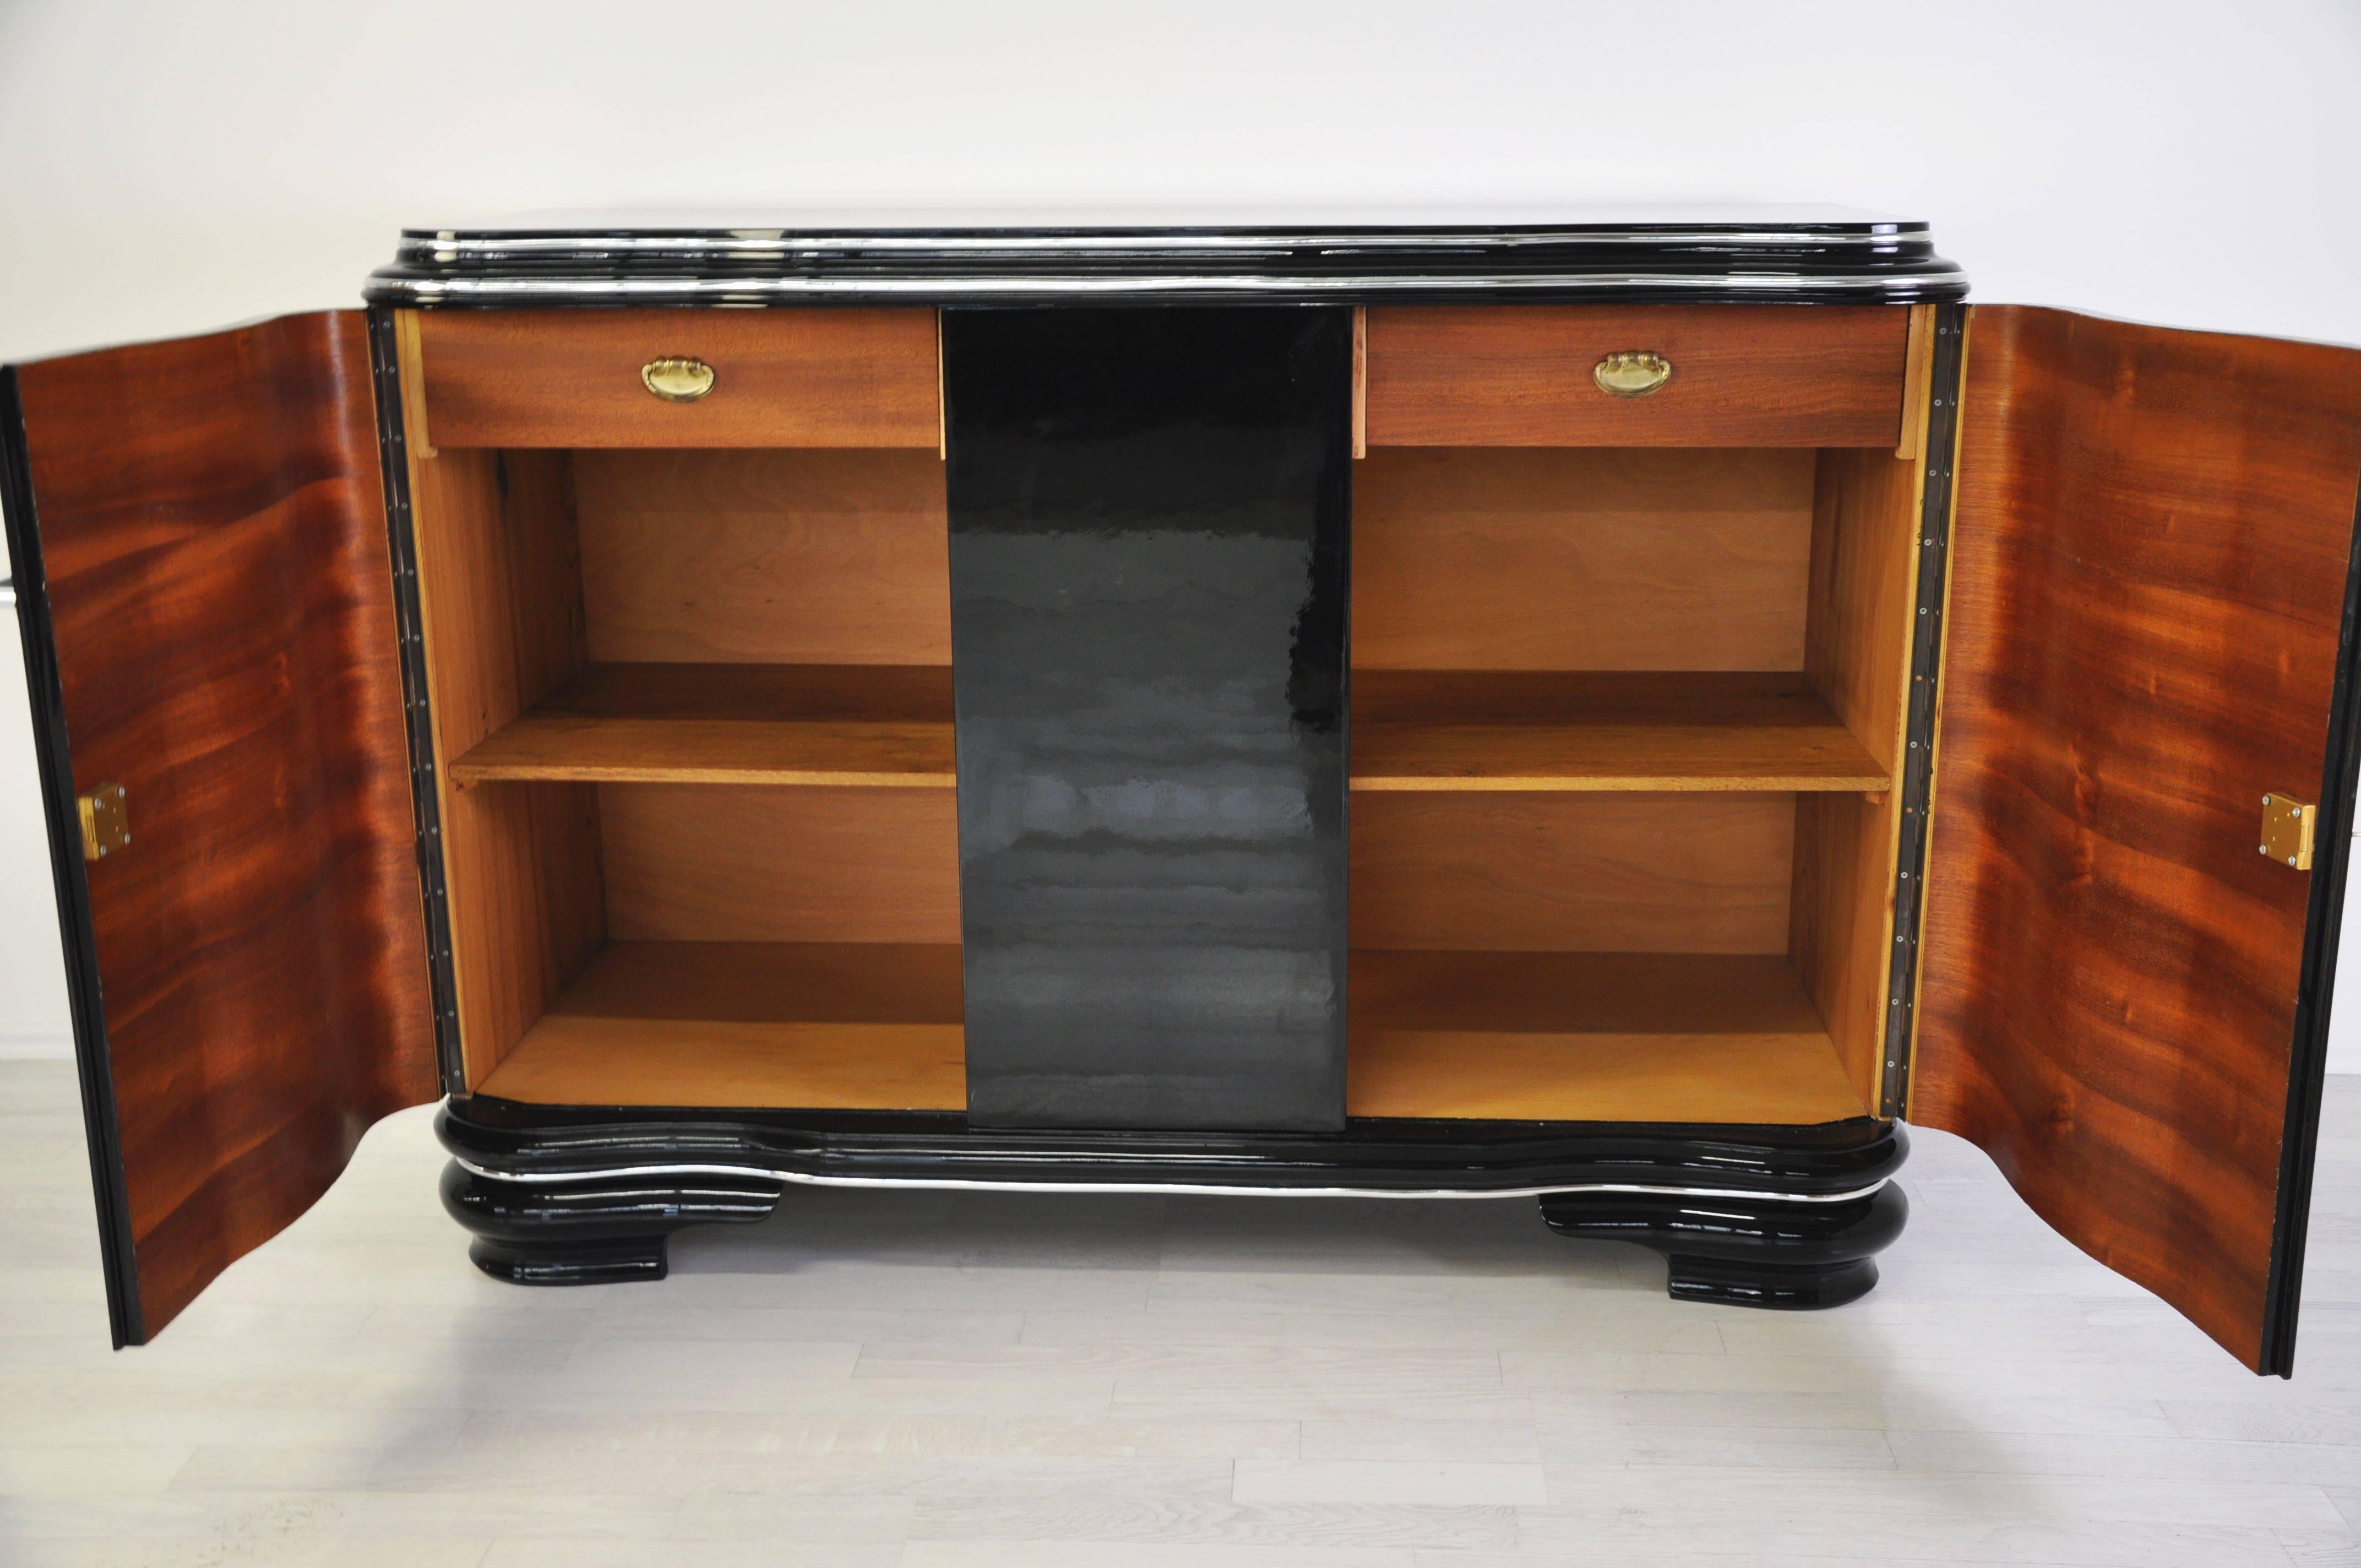 Lacquer French Art Deco Sideboard with Serpentine Doors